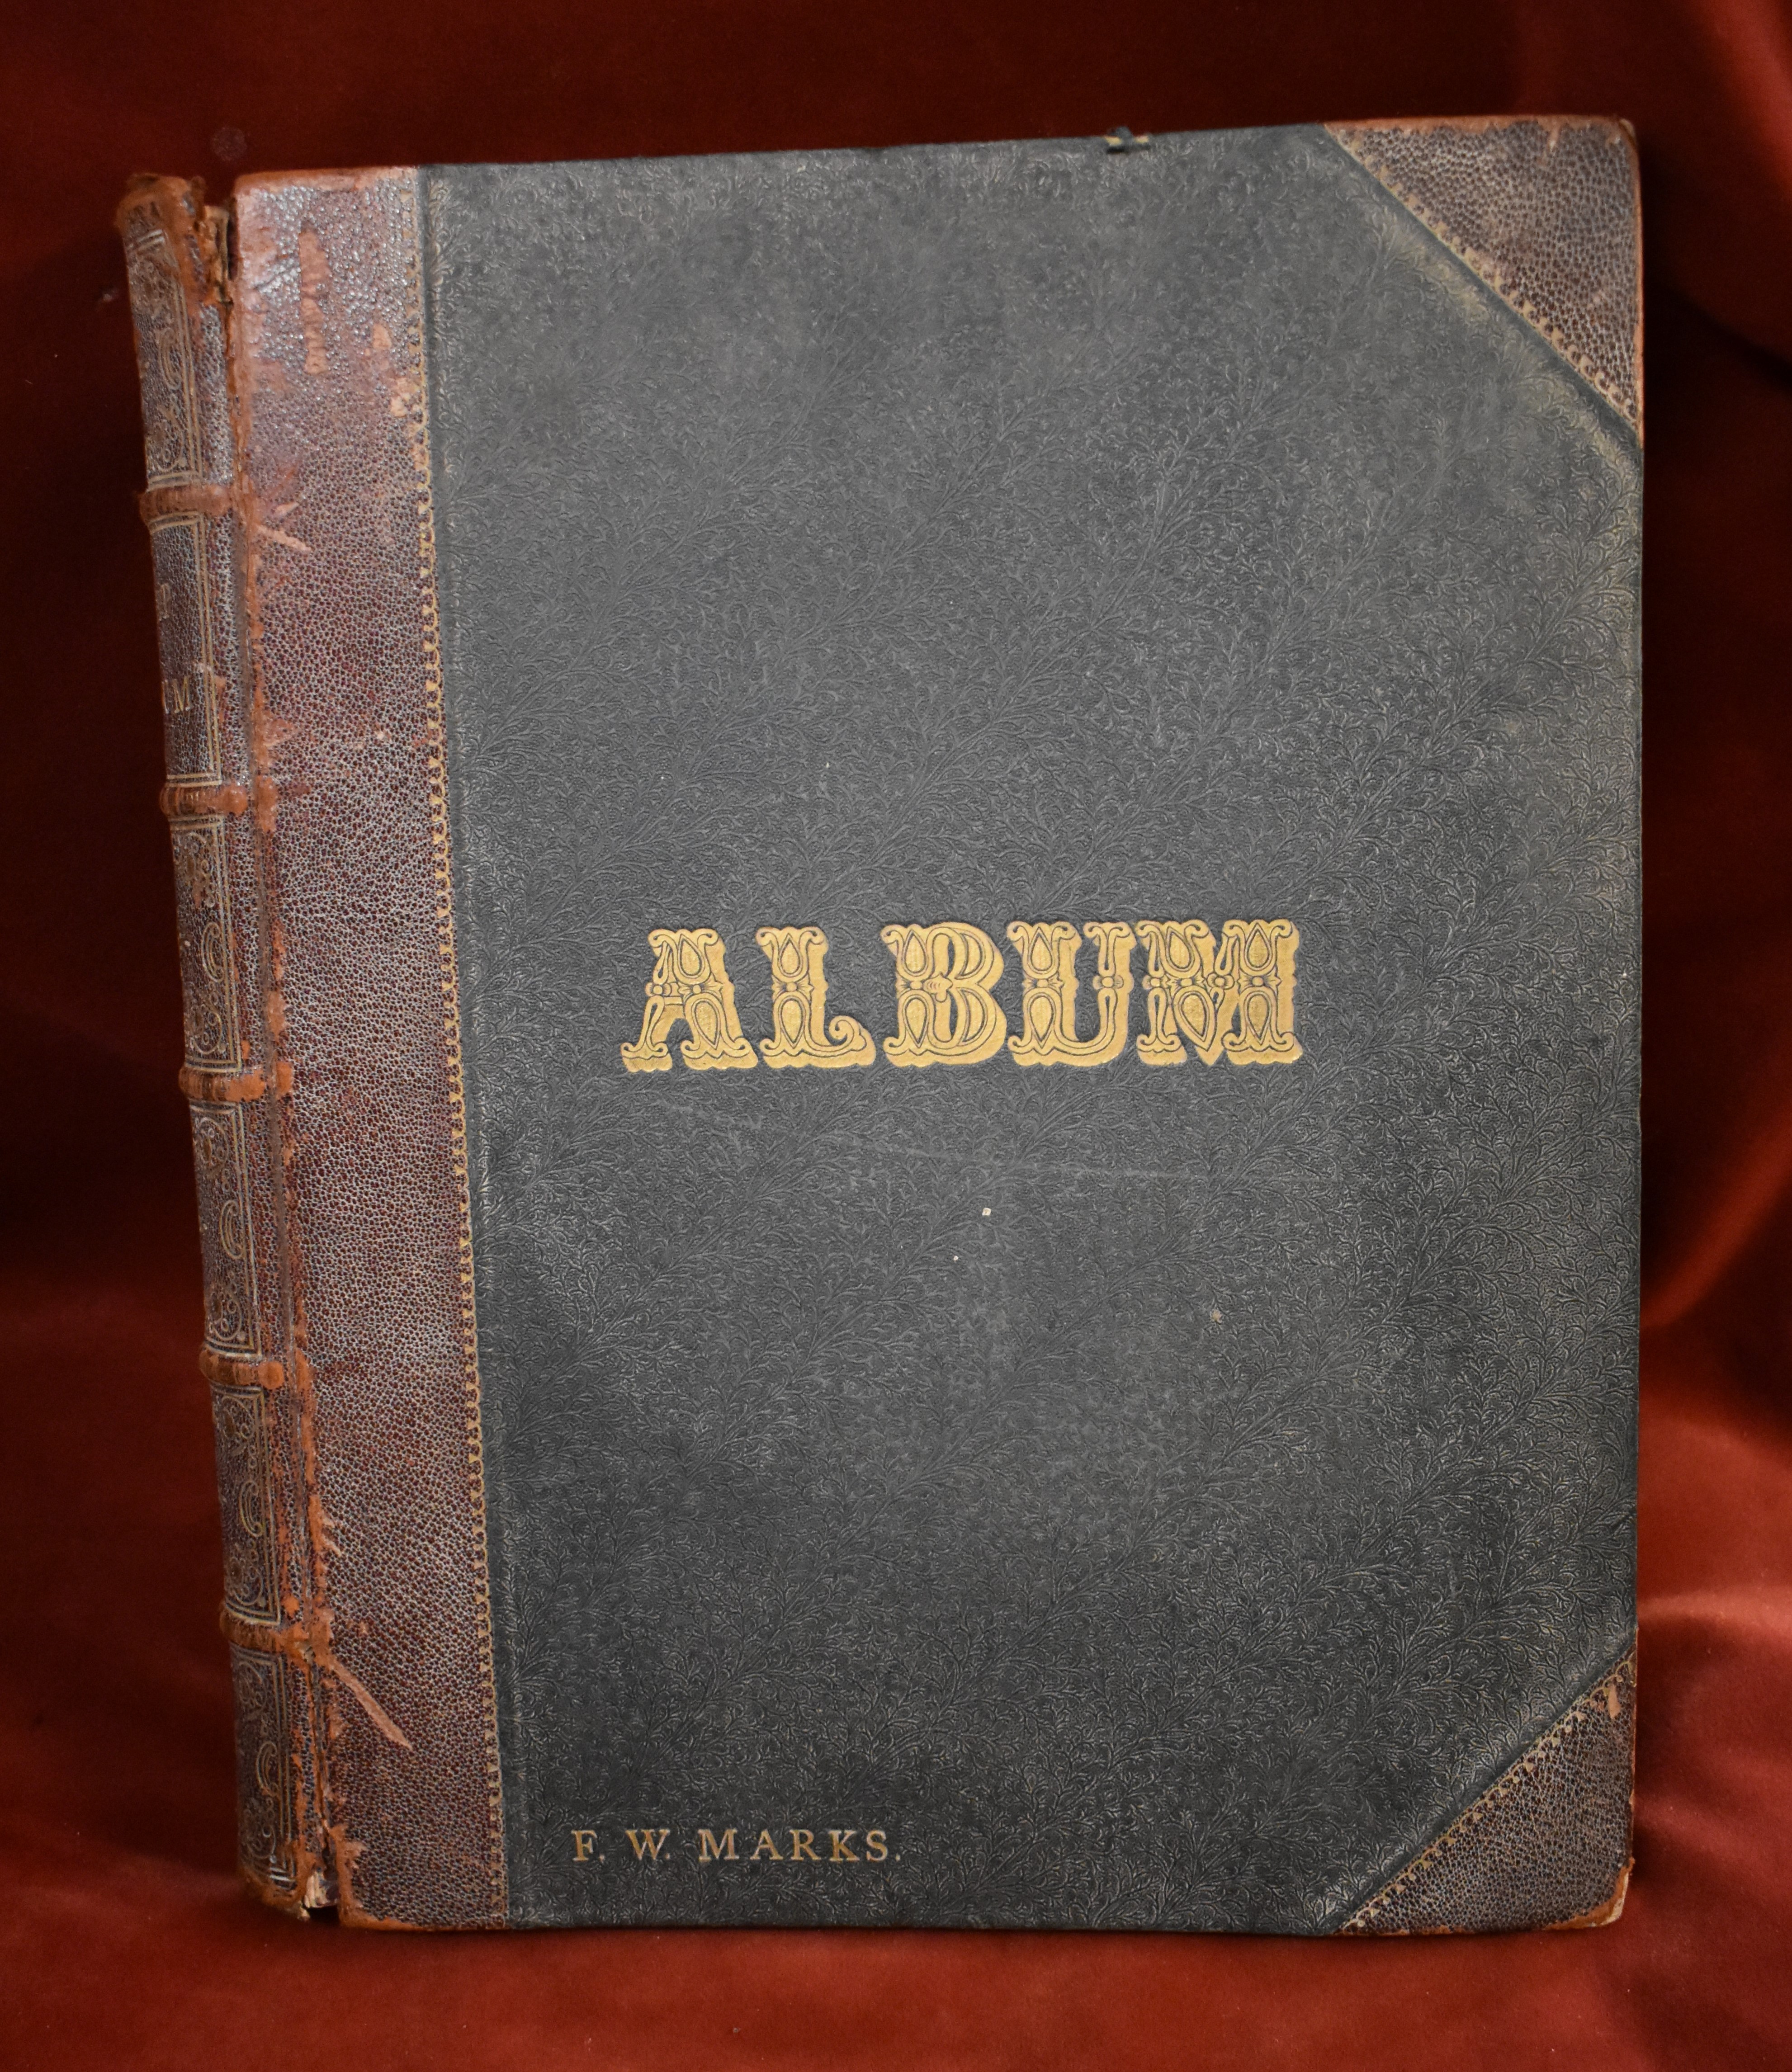 An Antique leather bound scrap Album, empty with clean pages.